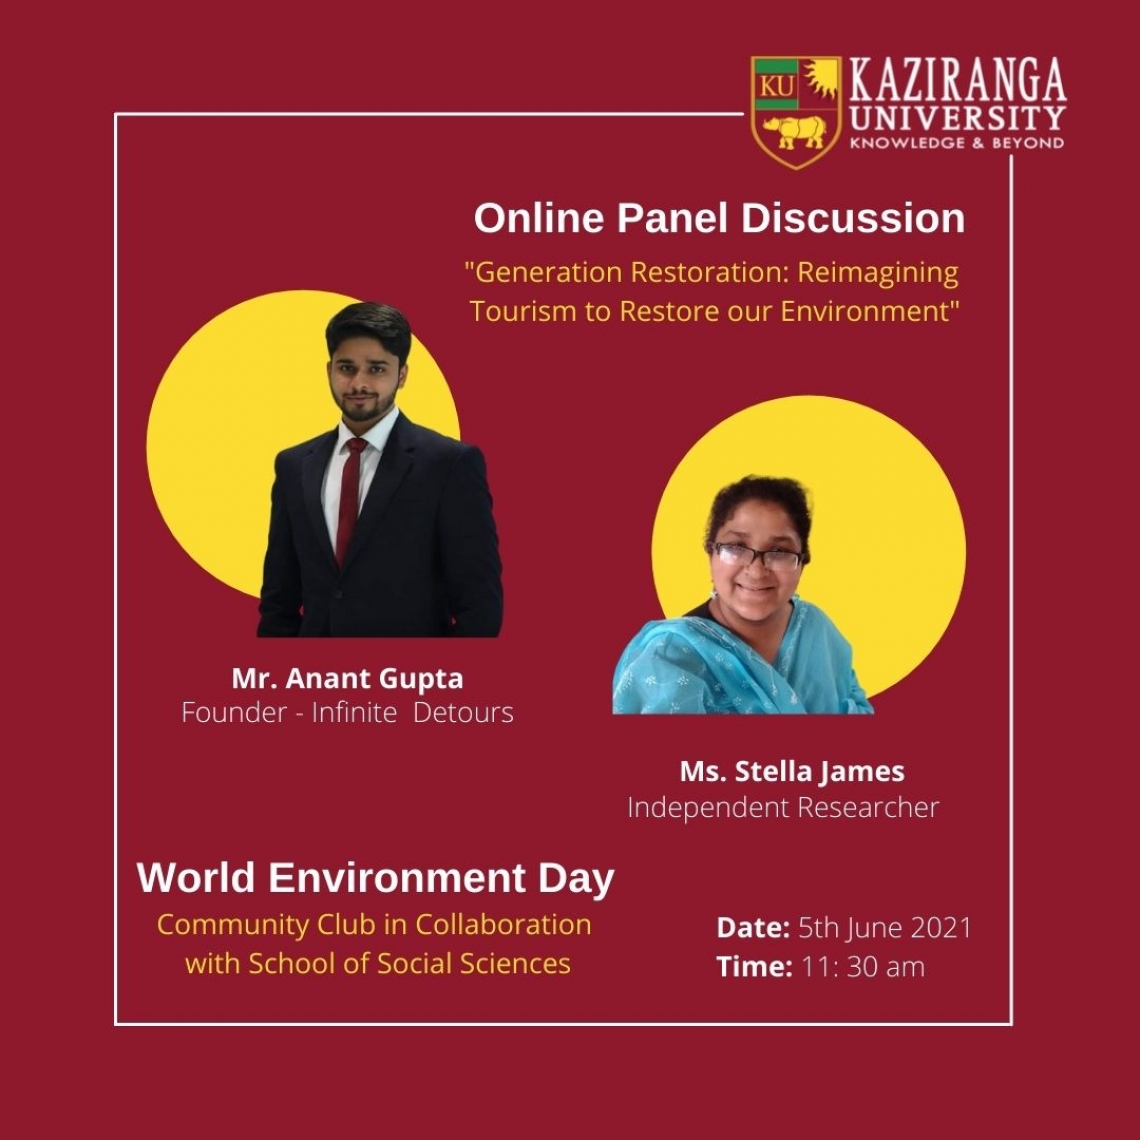 Online Panel Discussion titled Generation Restoration Reimagining Tourism to Restore our Environment